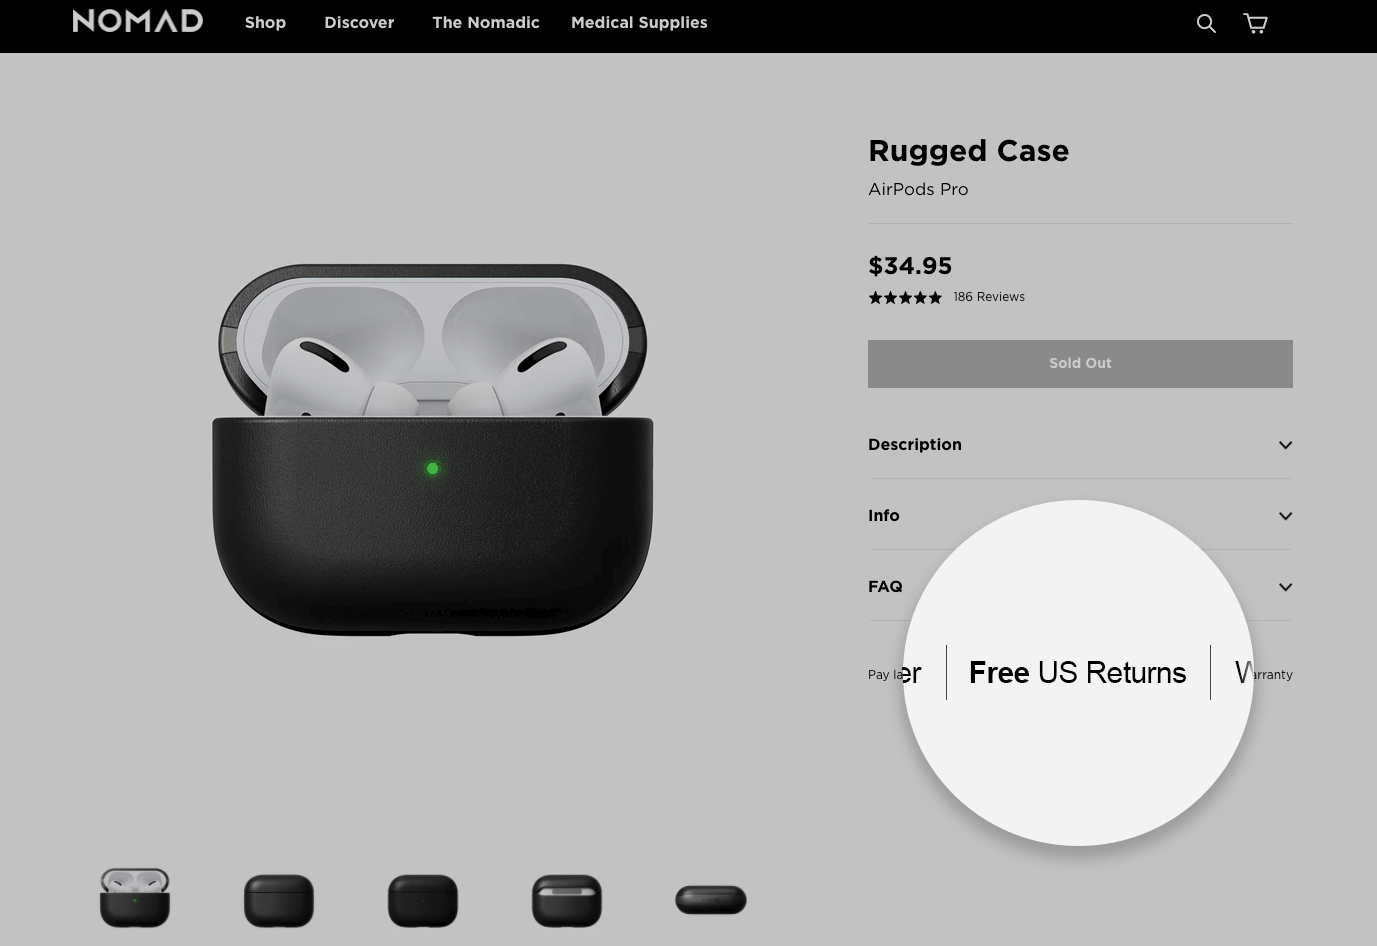 Nomad Product Page